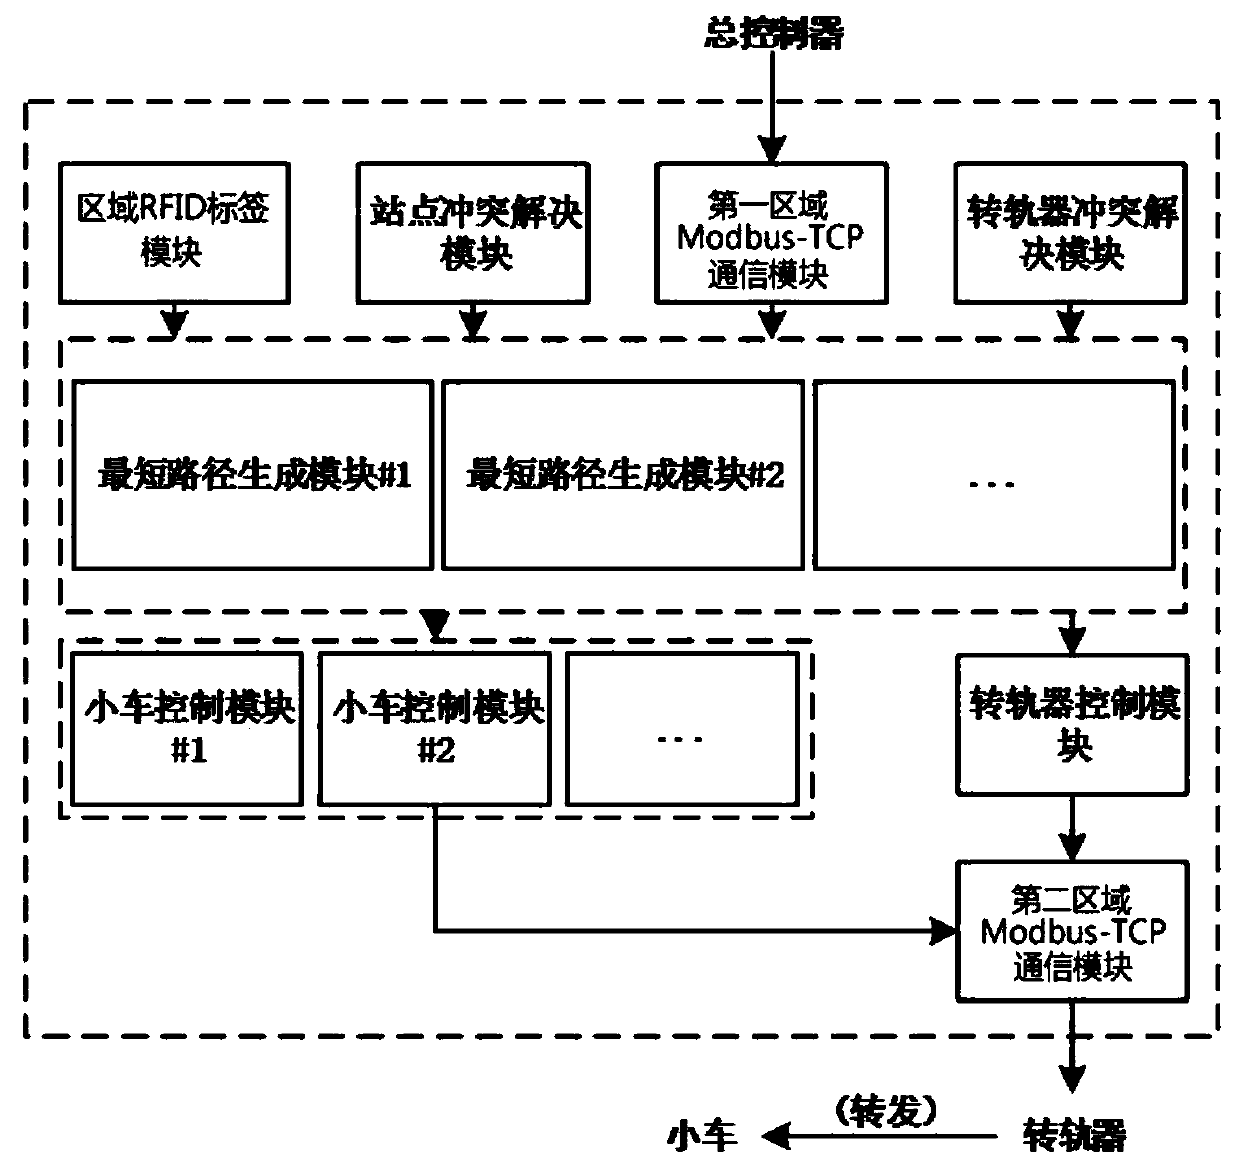 Rail transportation partition scheduling system